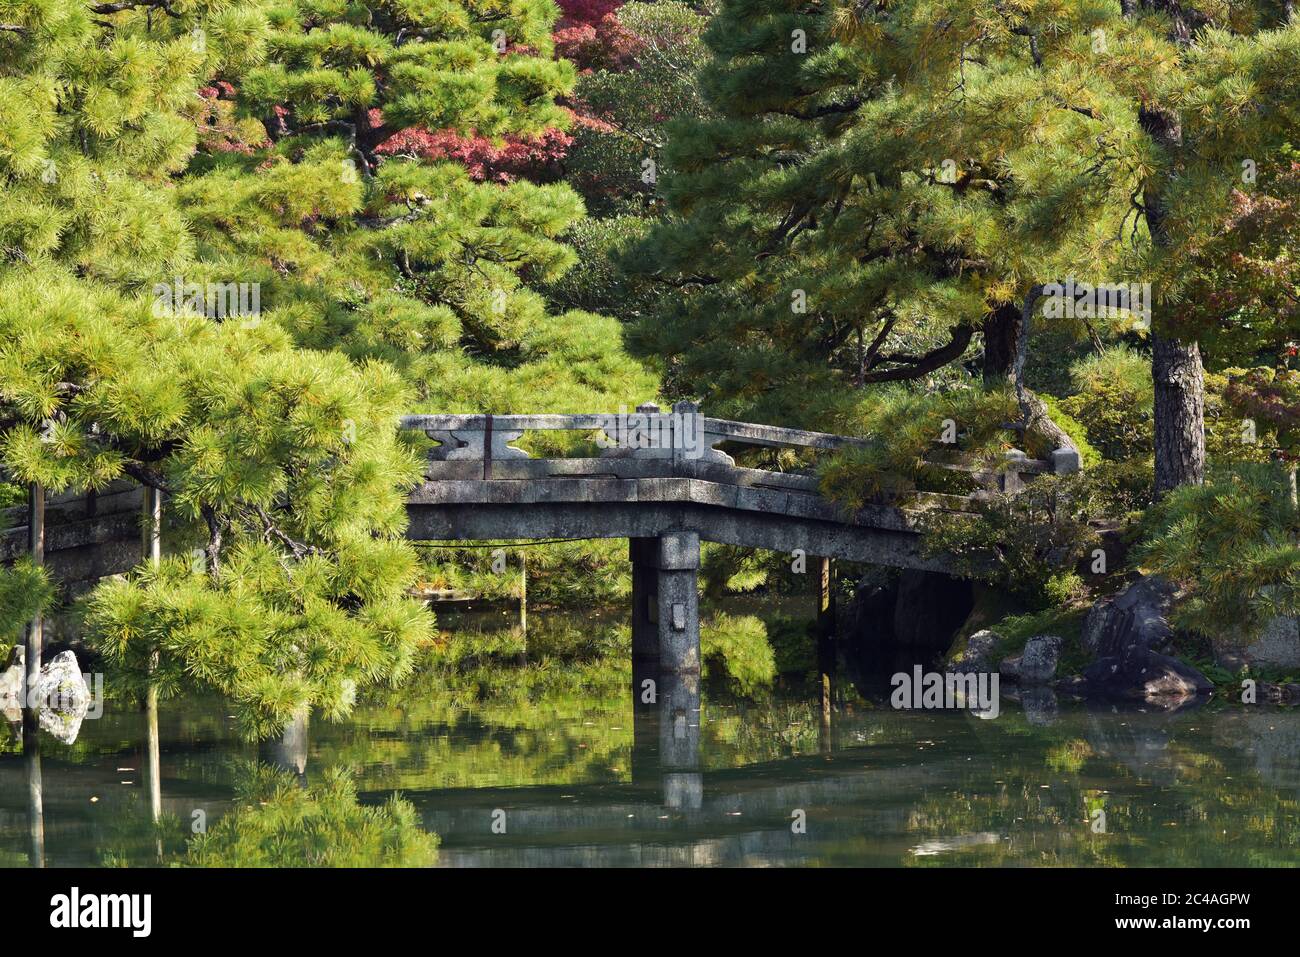 The Palace garden, Kyoto Gyoen National Garden and the Kyoto Imperial Palace Stock Photo